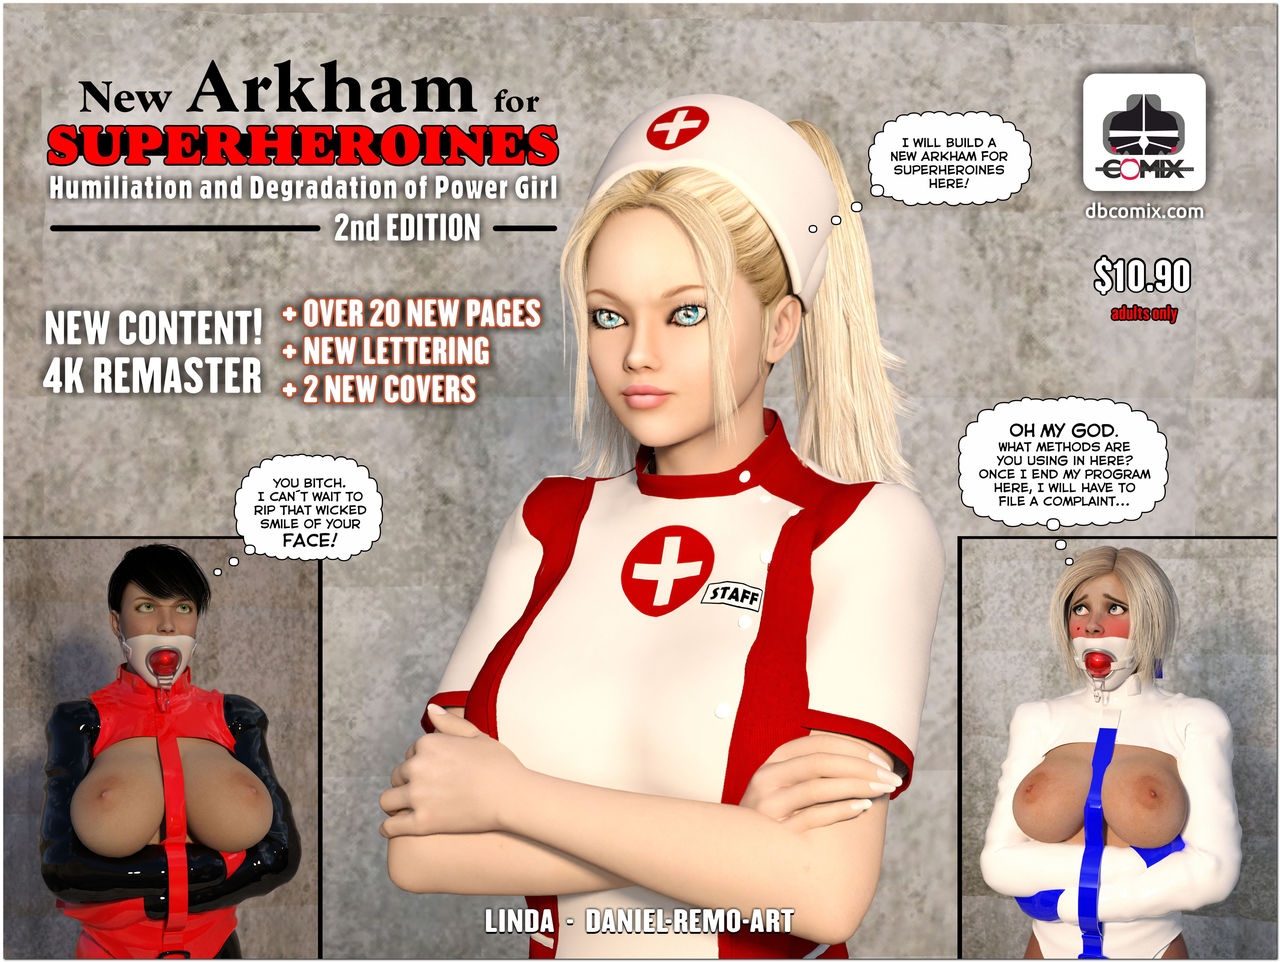 [DBComix] New Arkham For Superheroines 1 2nd Edition - Humiliation and Degradation of Power Girl 81